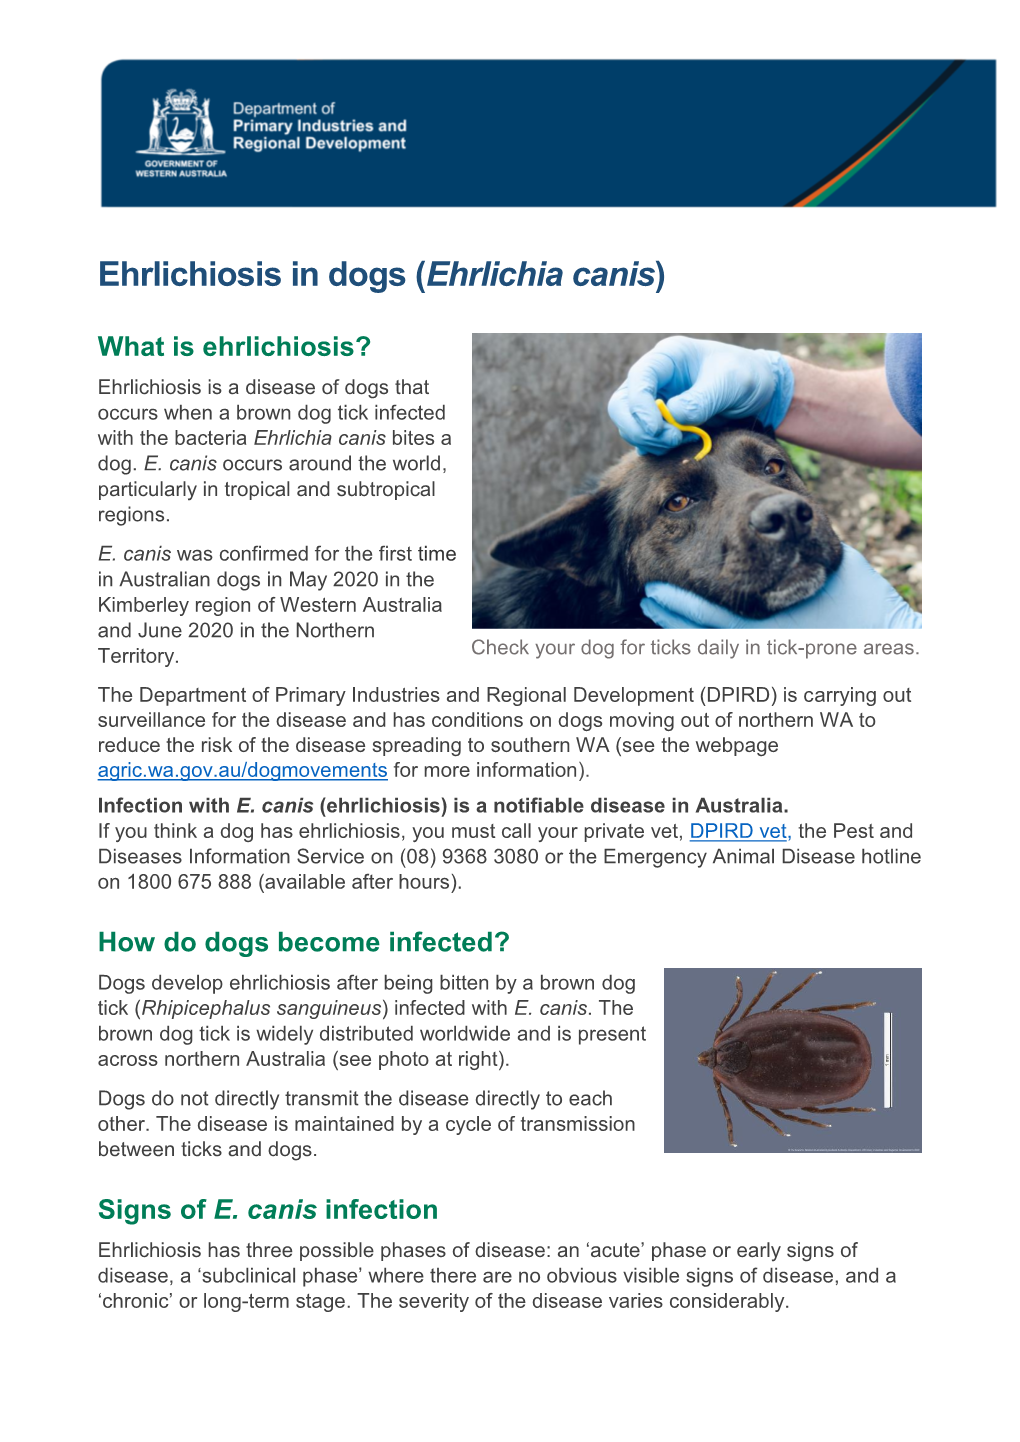 Ehrlichiosis in Dogs (Ehrlichia Canis)